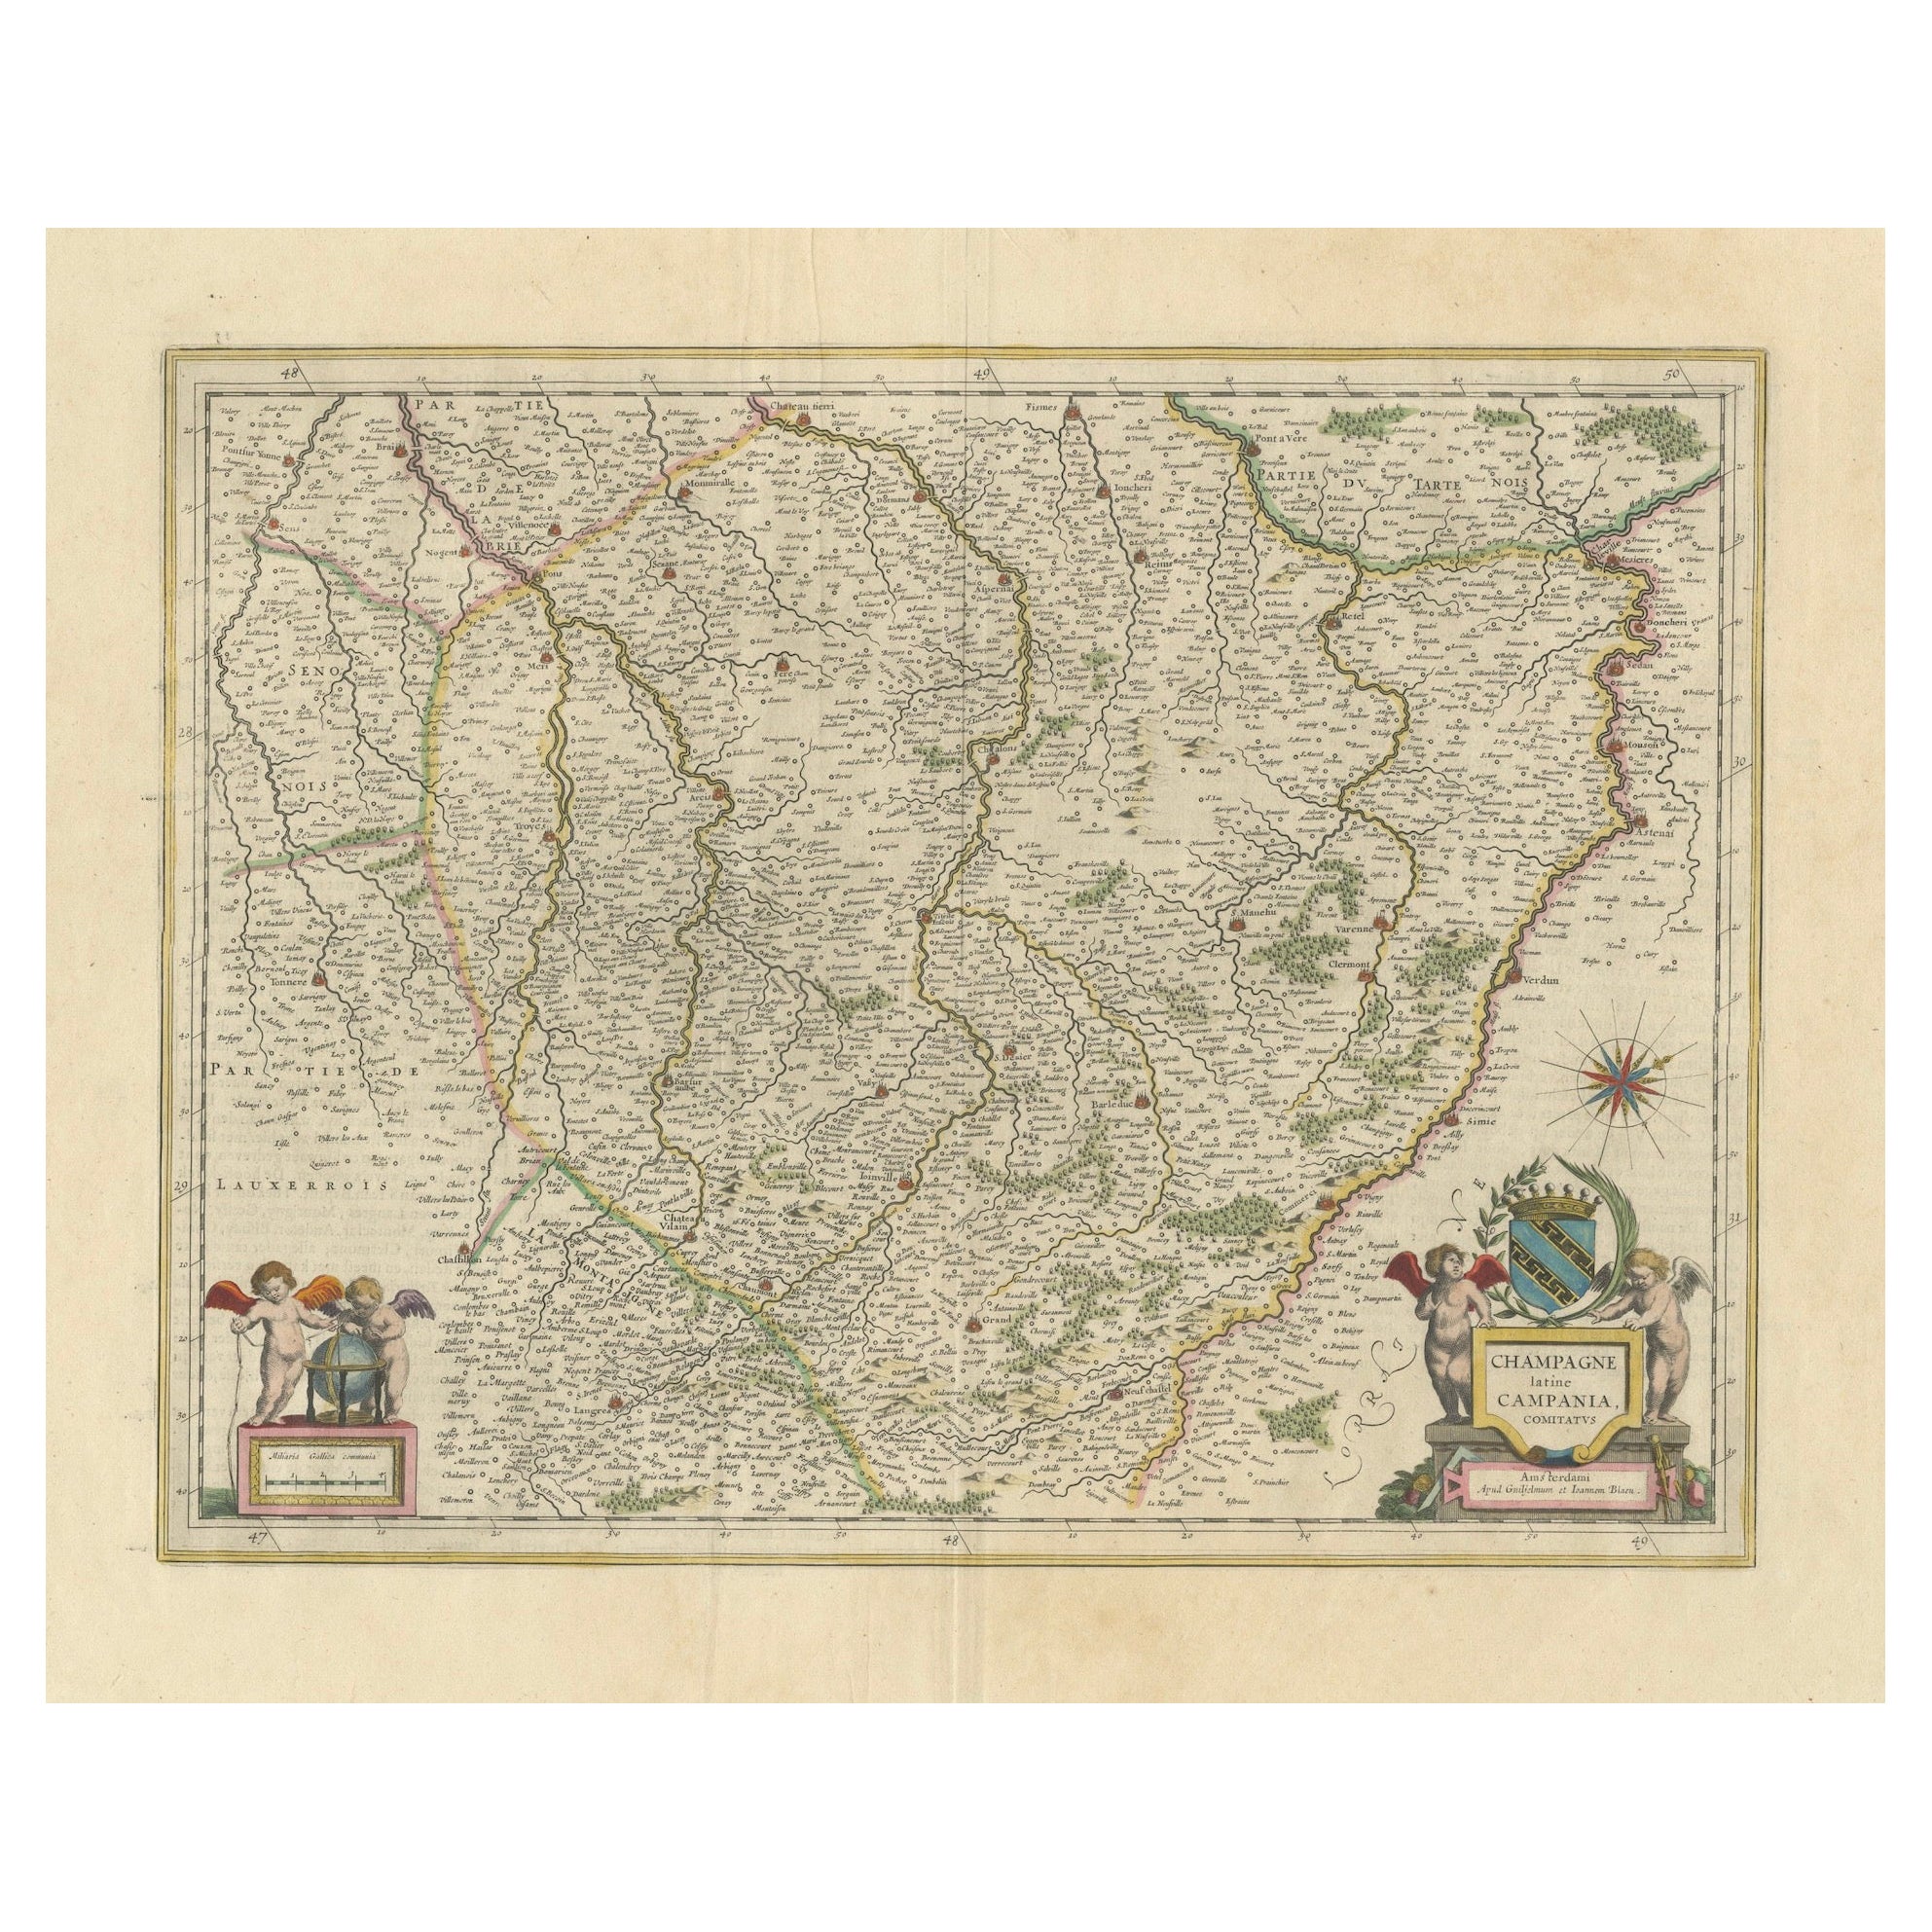 Authentic 1644 Janssonius Map of the Champagne Region (Campania) in France